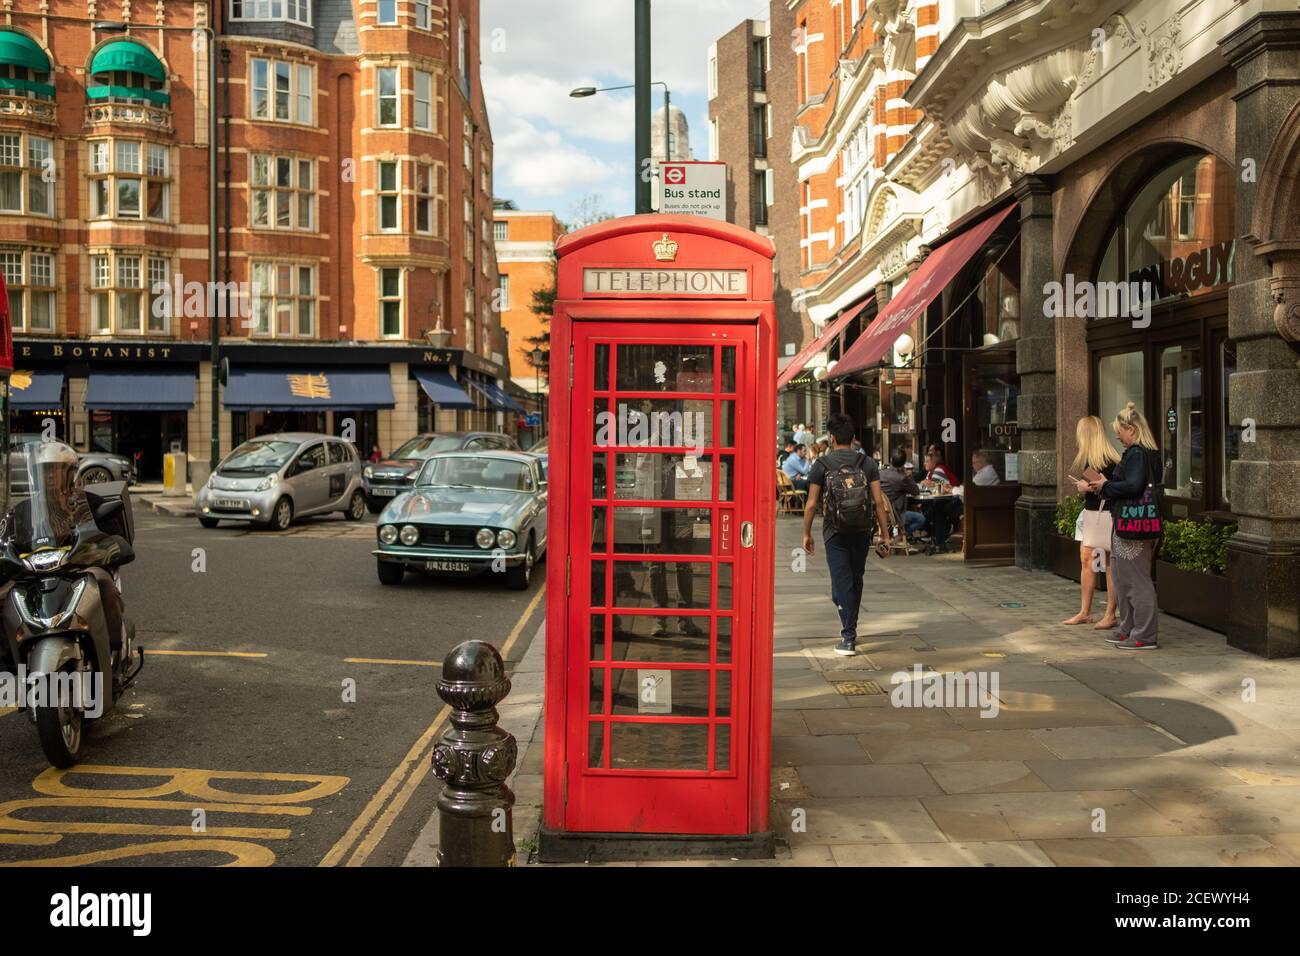 London street scene on Sloane Square, notable for its high end fashion shops Stock Photo